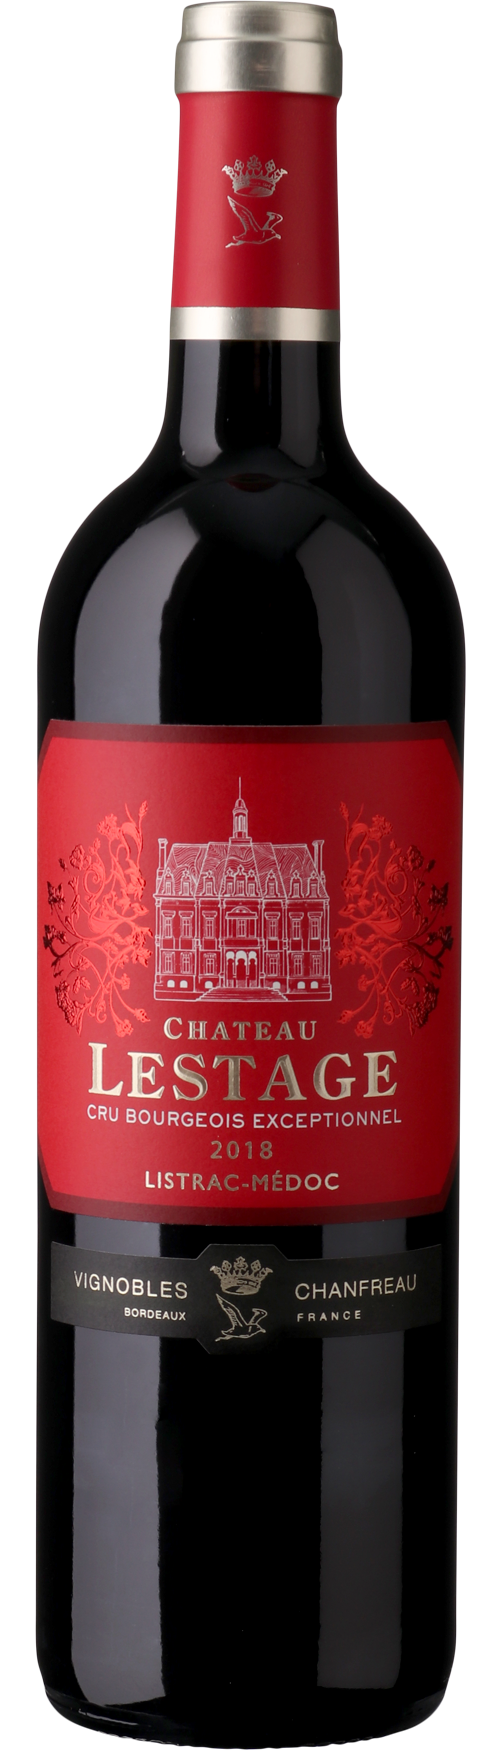 Ch. Lestage Medoc cru bourgeois exceptionnel